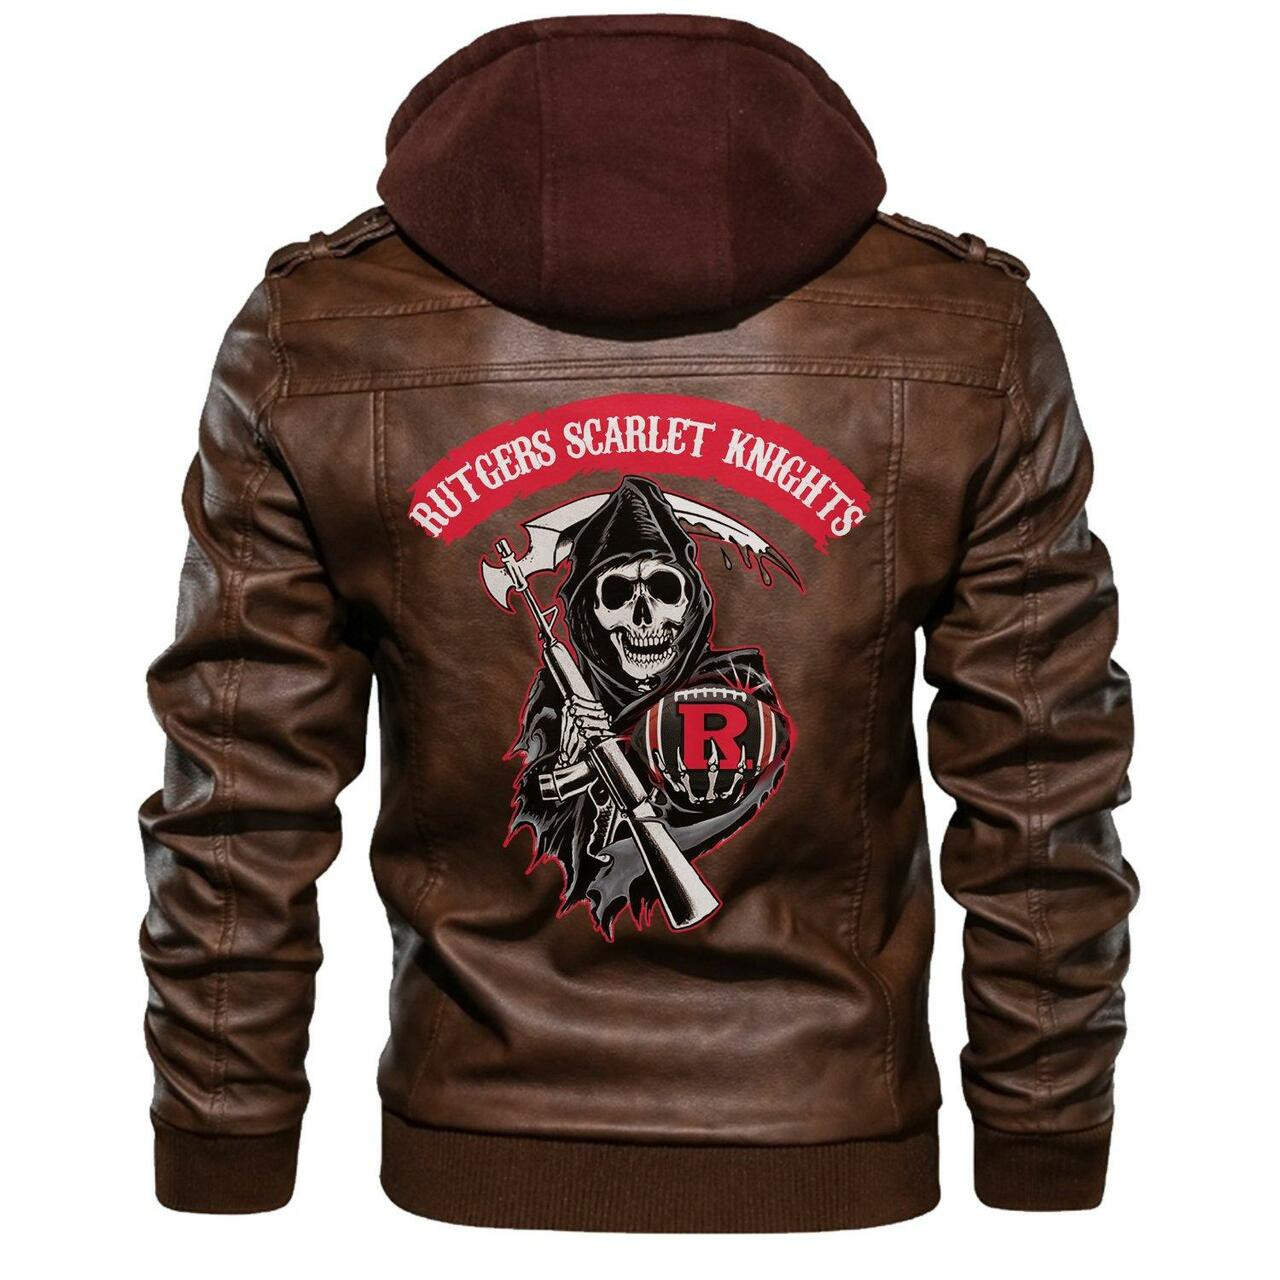 Check out and find the right leather jacket below 69